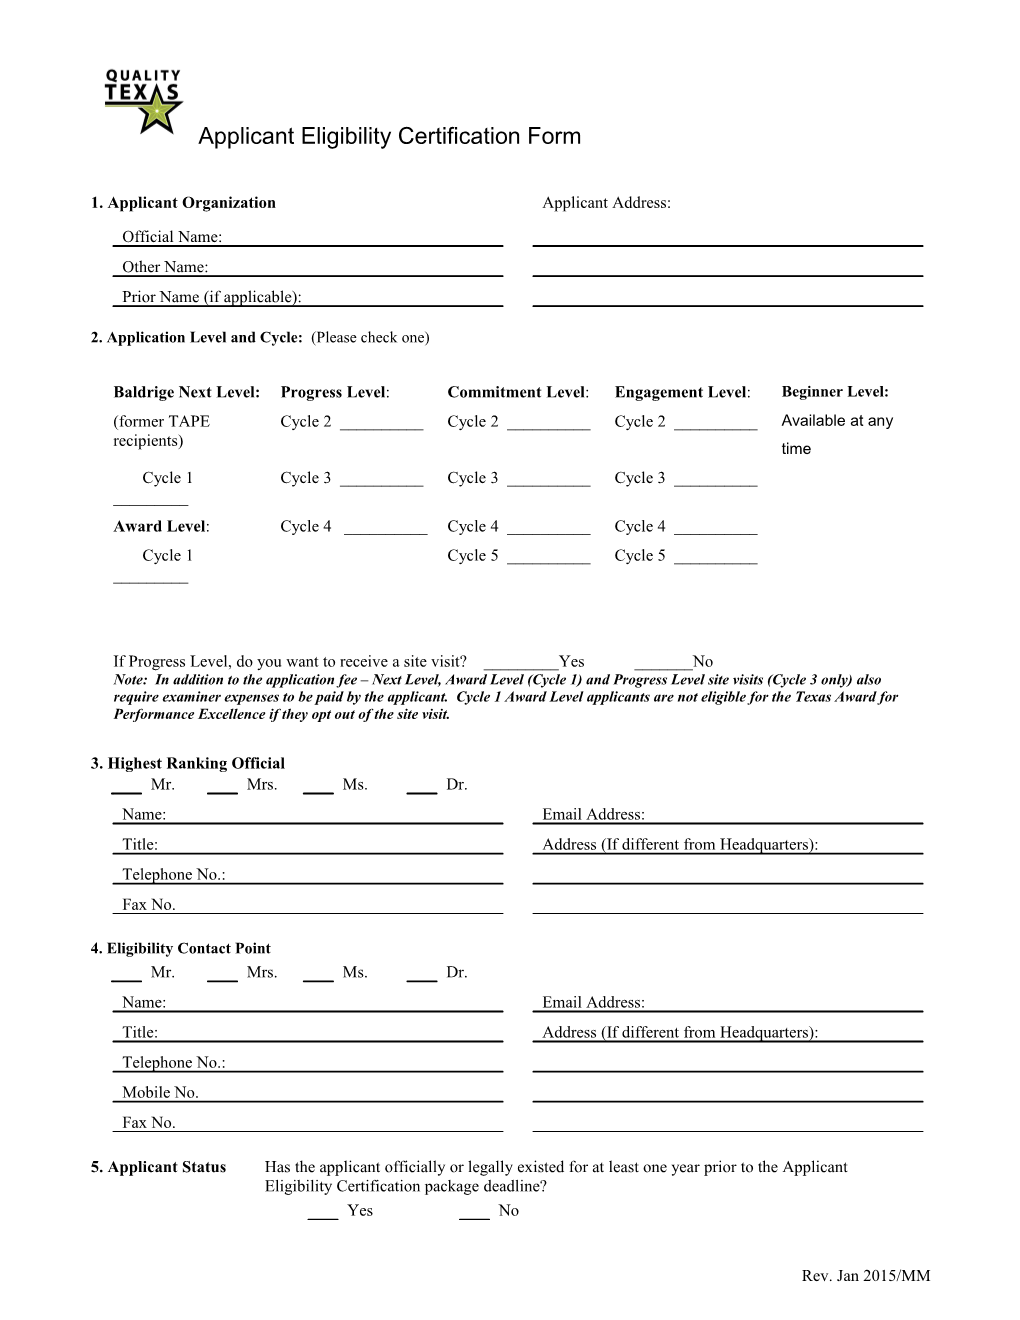 Applicant Eligibility Certification Form